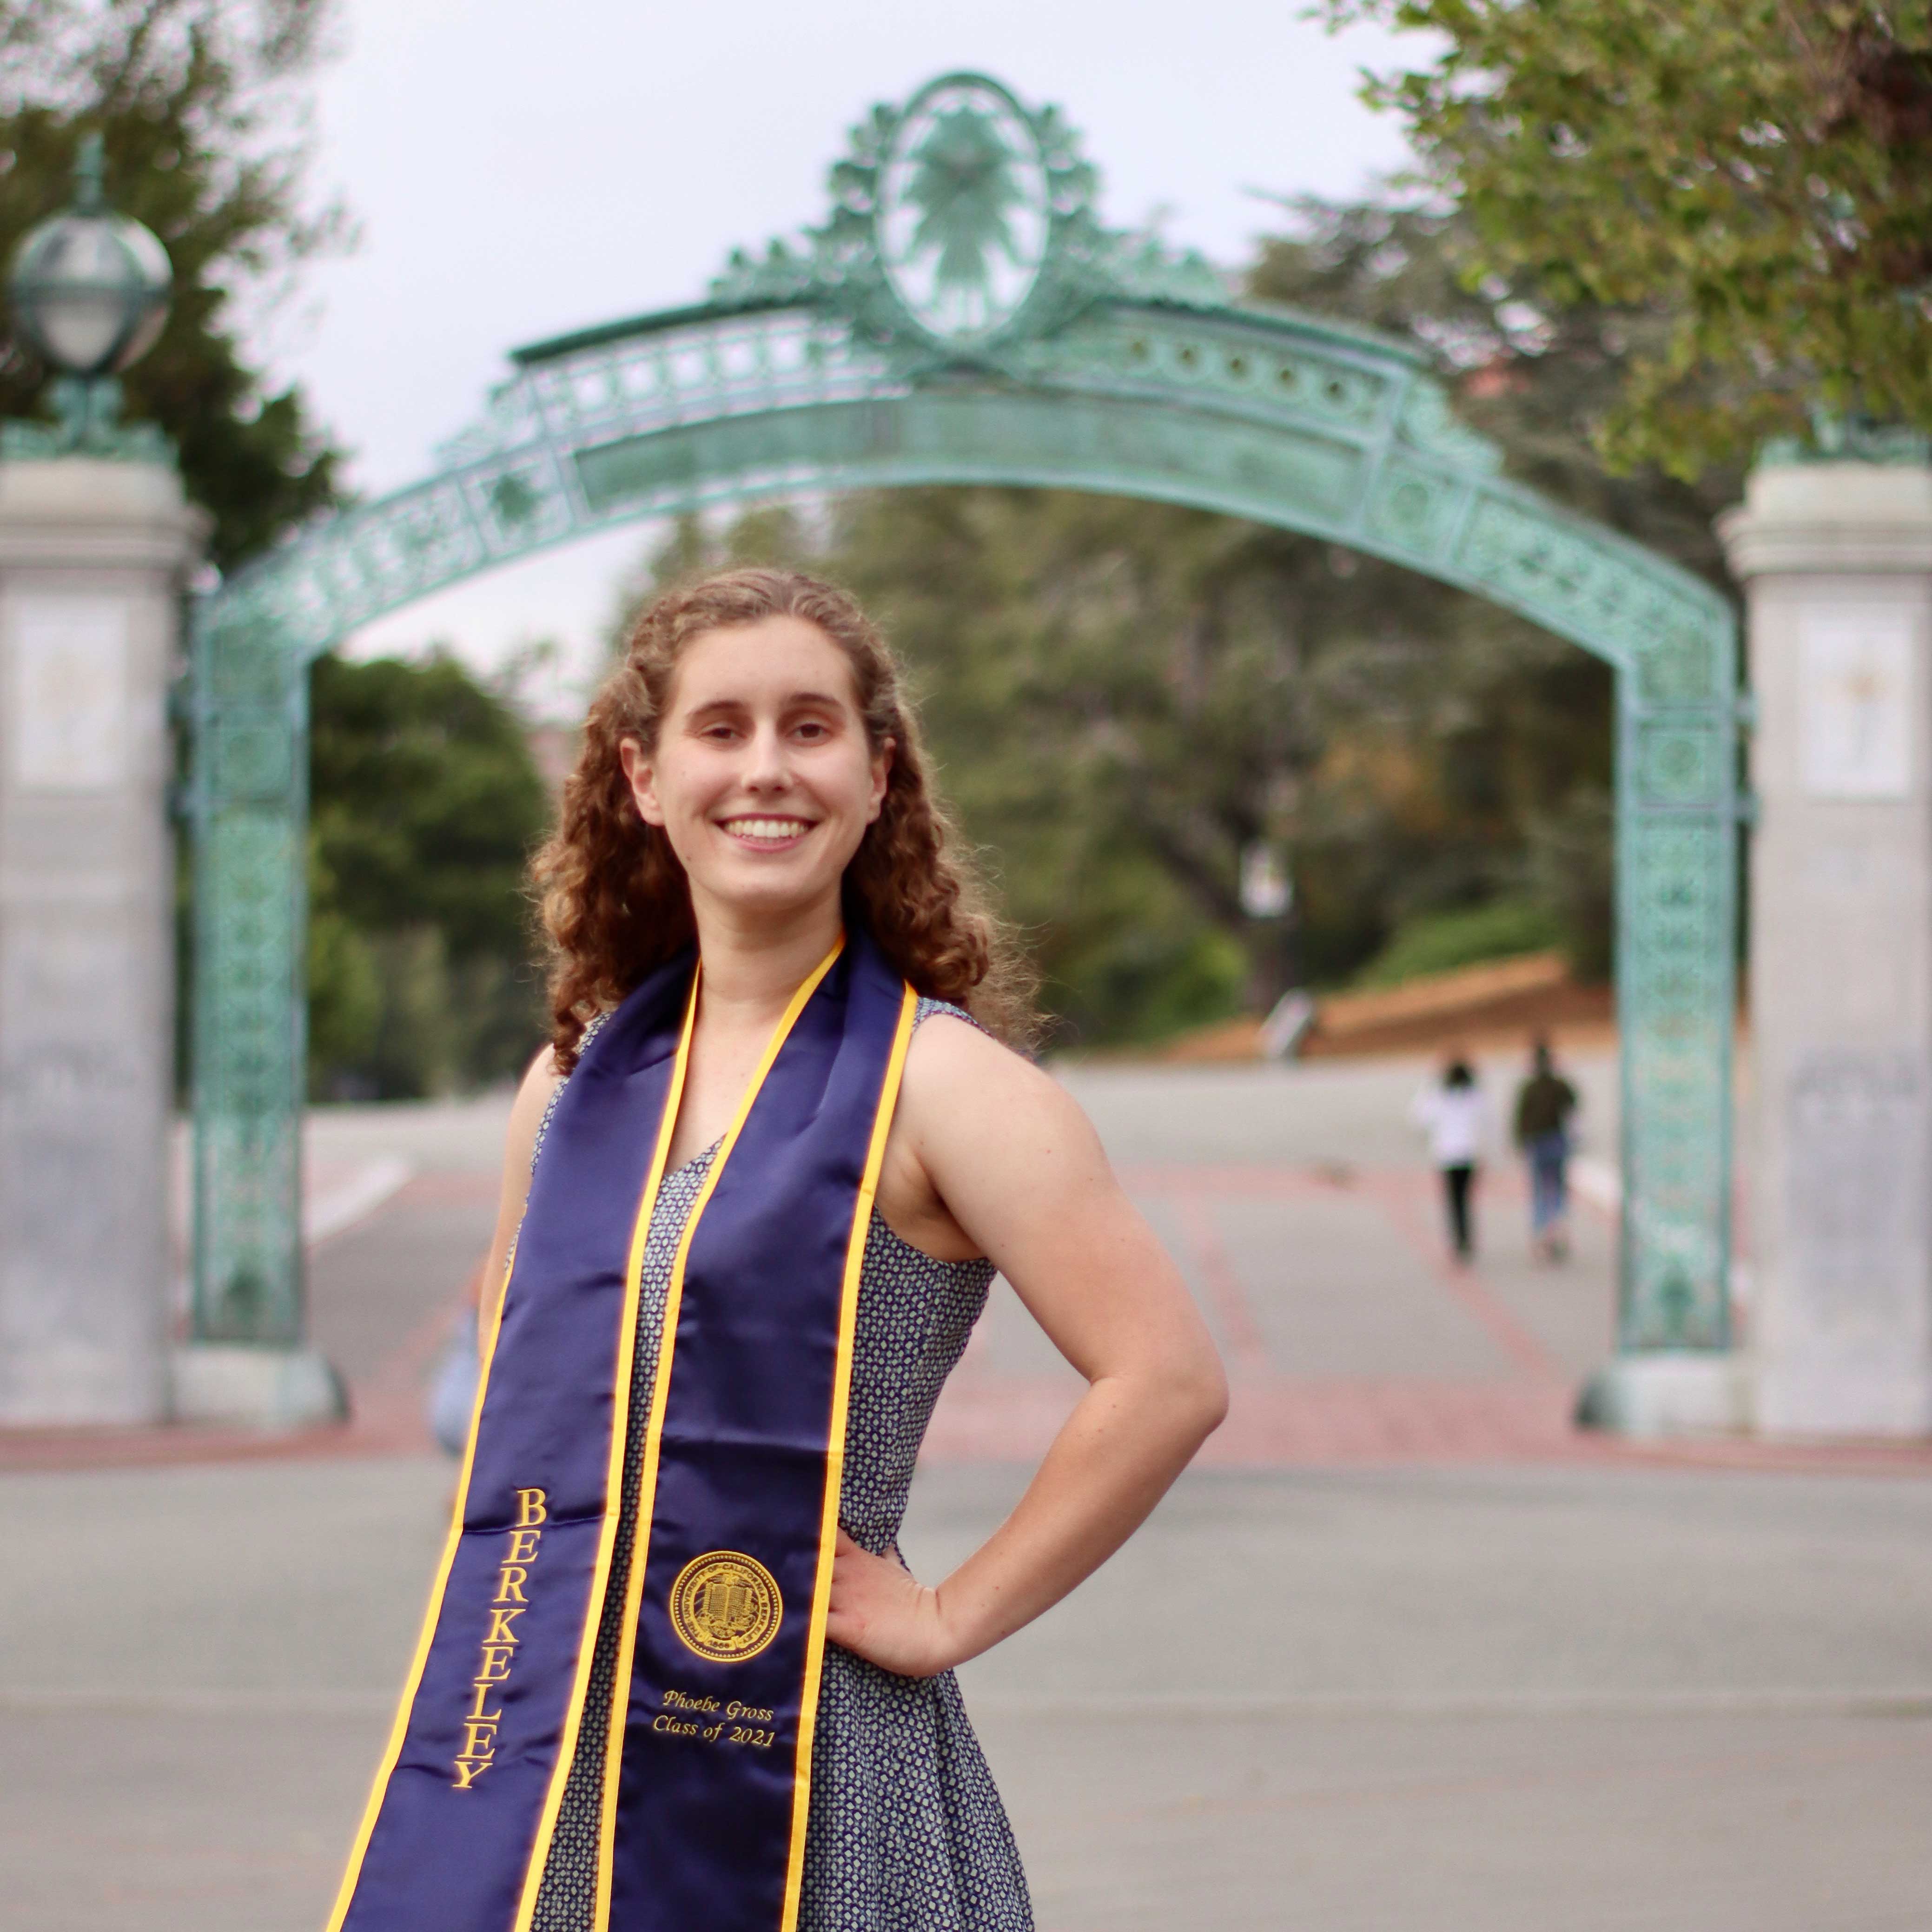 Phoebe Gross graduation photograph with Sather Gate